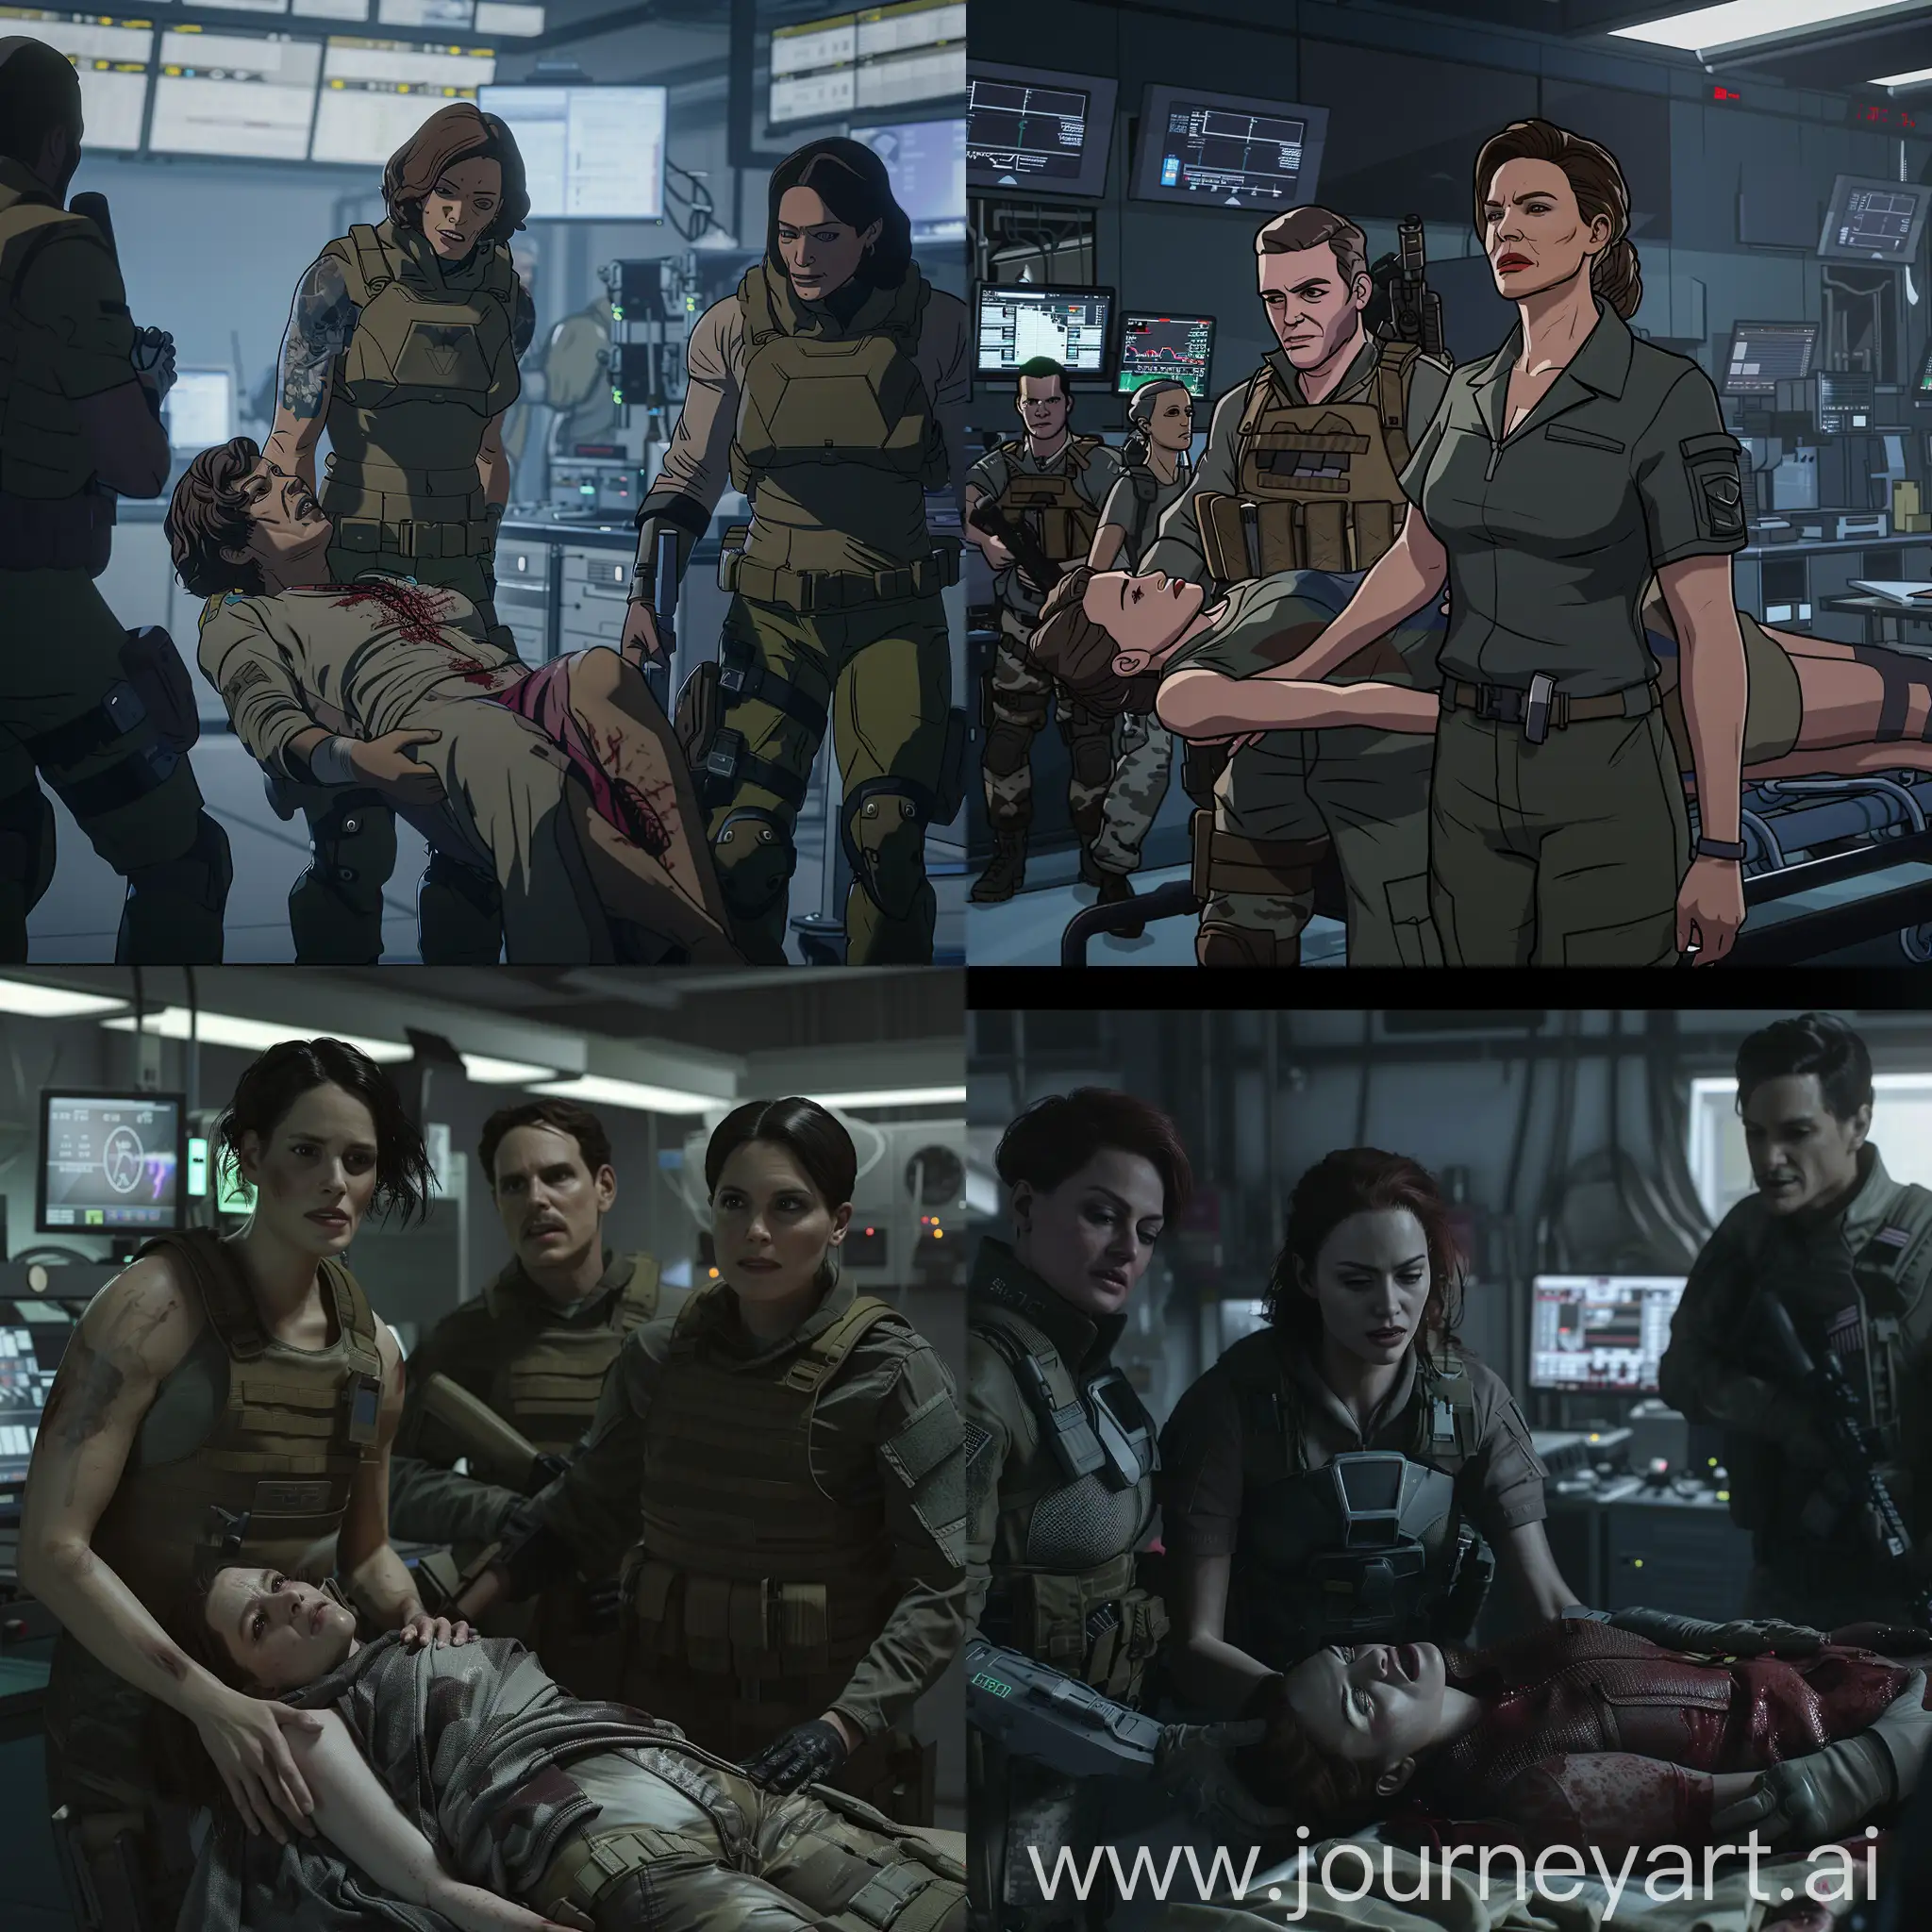 /imagine prompt: 2D animation, personality:US soldiers are seen dragging, who is unconscious, into the lab. The scene is filled with tension and urgency as Amanda Waller supervises the soldiers. The Woman is limp in their arms, her face expressionless. The lab is cold and sterile, with monitors and equipment in the background. Amanda Waller's face is stoic and determined as she watches the scene unfold. unreal engine, hyper real --q 2 --v 5.2 --ar 16:9